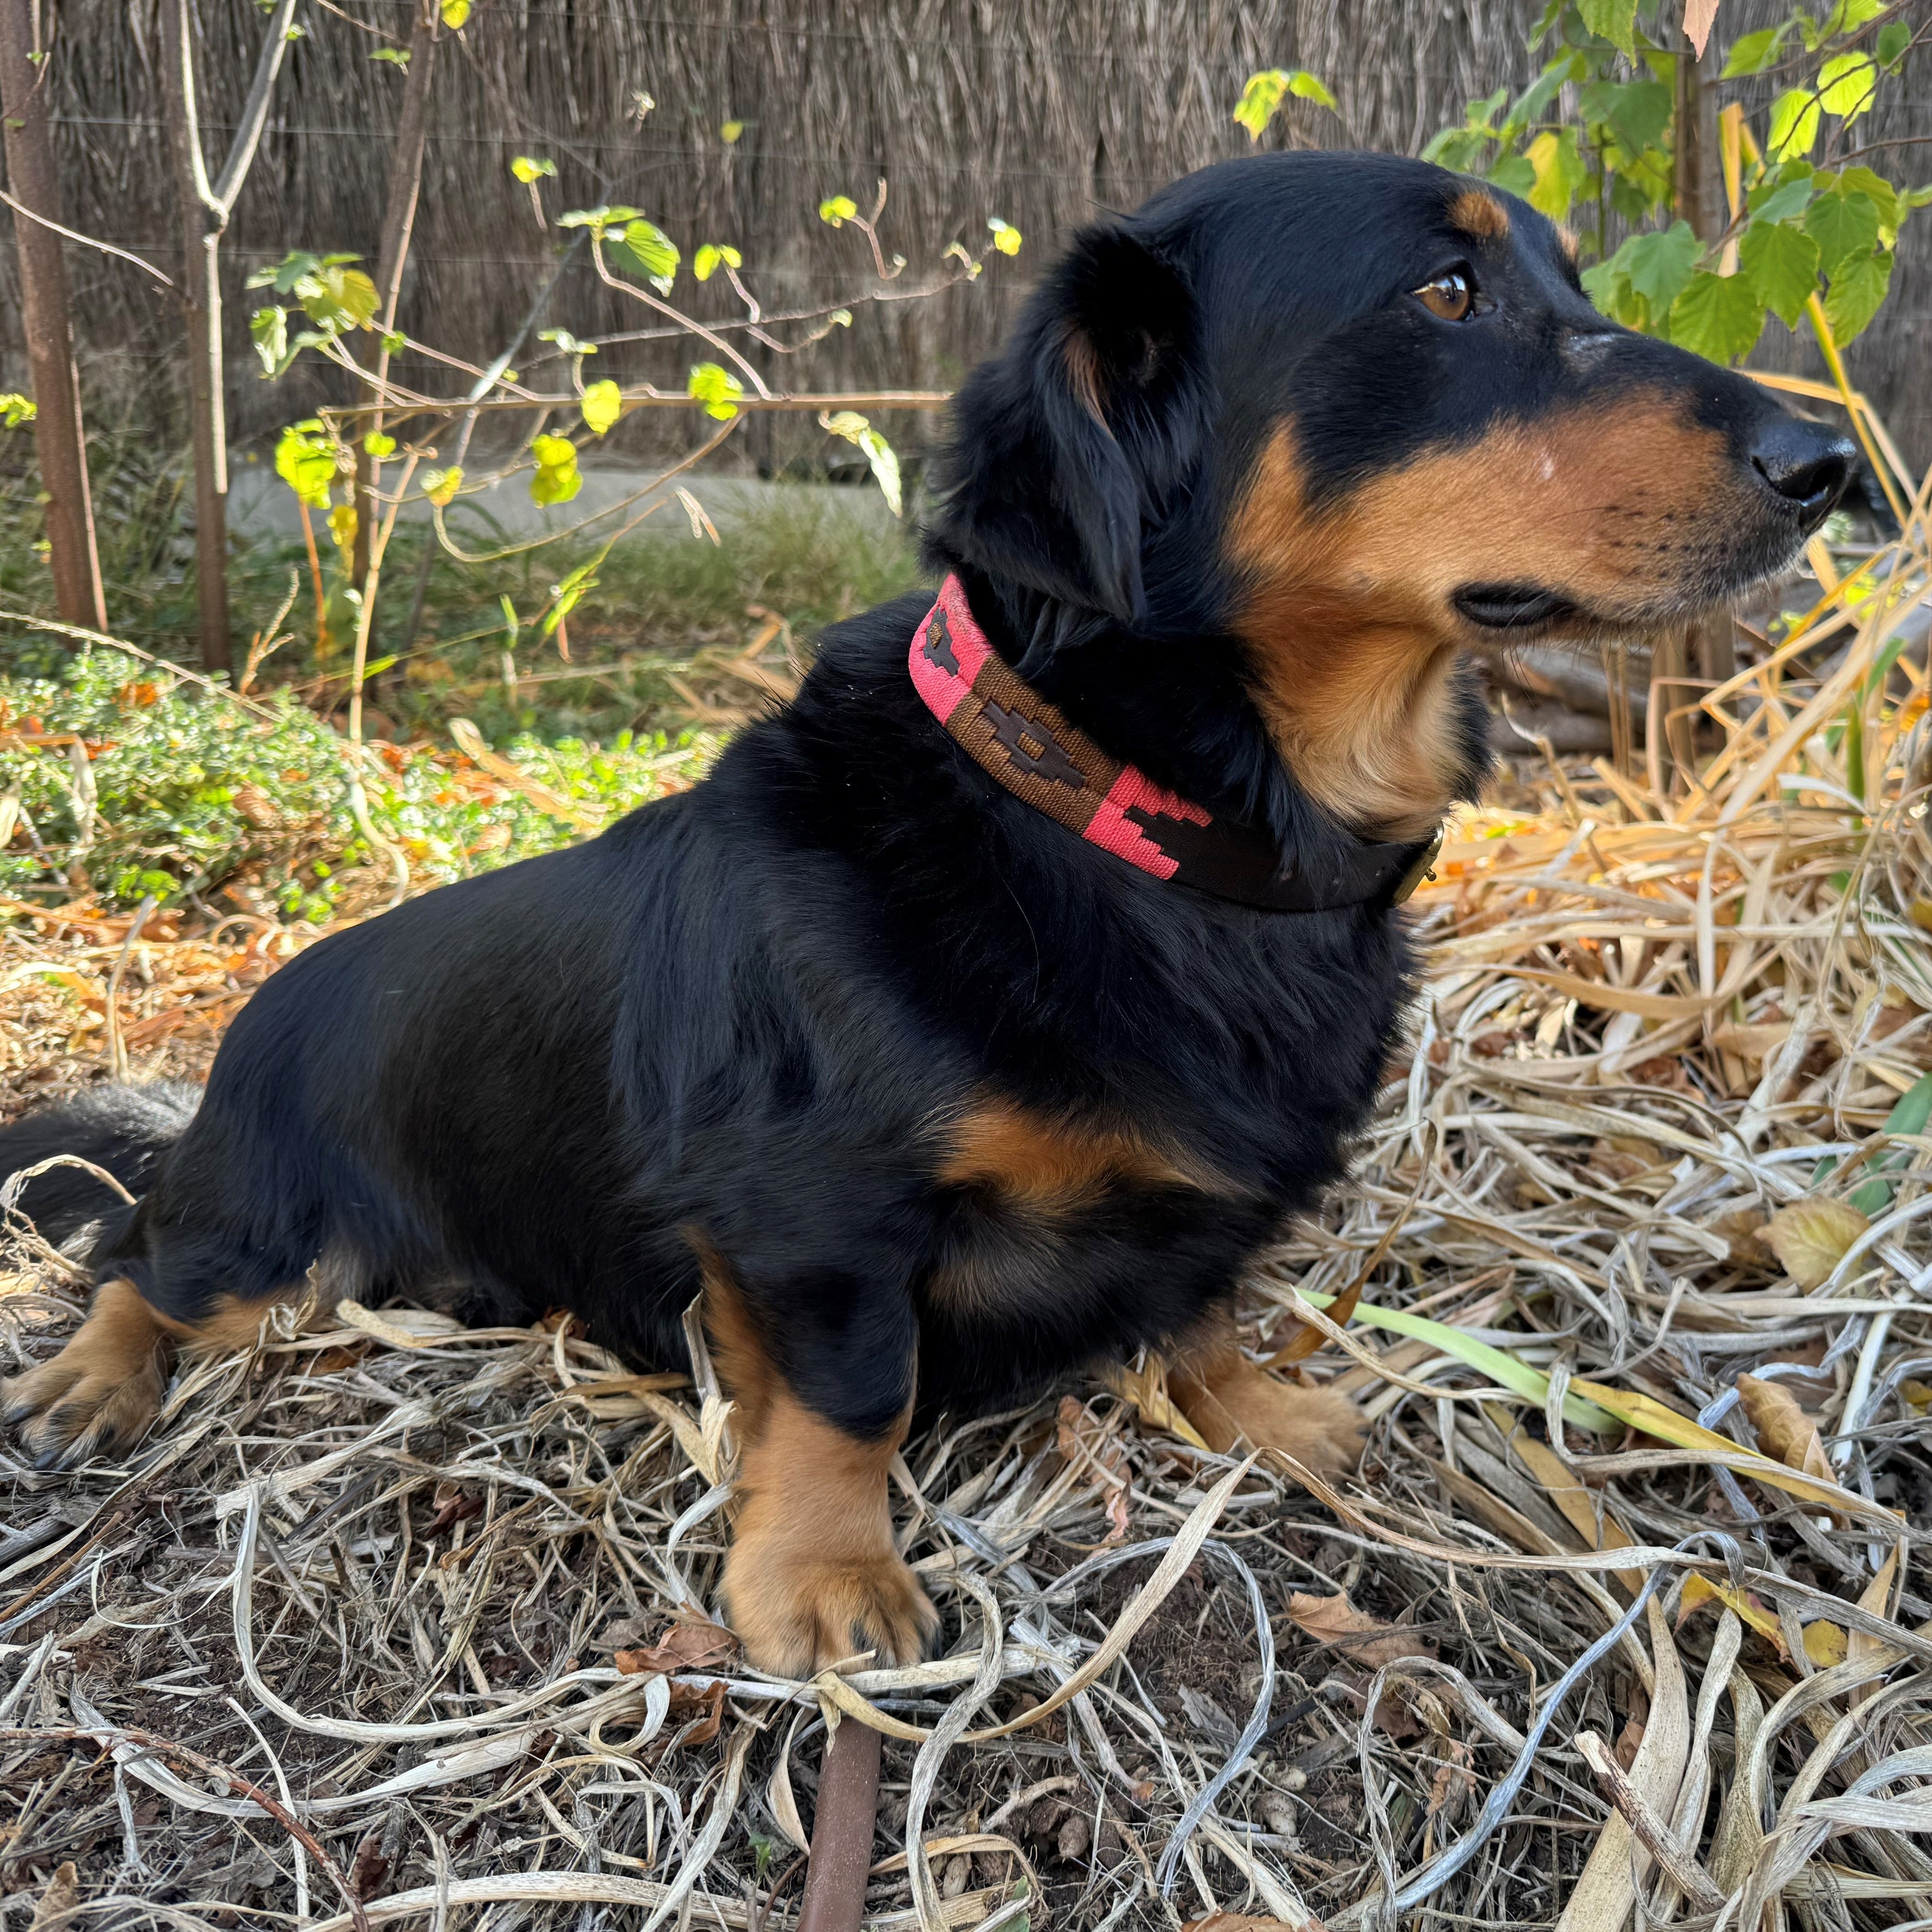 A small black and tan dog with a red harness sits attentively among dry grass and plants. The dog has short legs, long fur, and large ears that hang down. Sporting a Polo Collar - Poppy from Georgie Paws, it looks off to the right, seemingly focused on something in the distance. Various green and brown vegetation surround it.